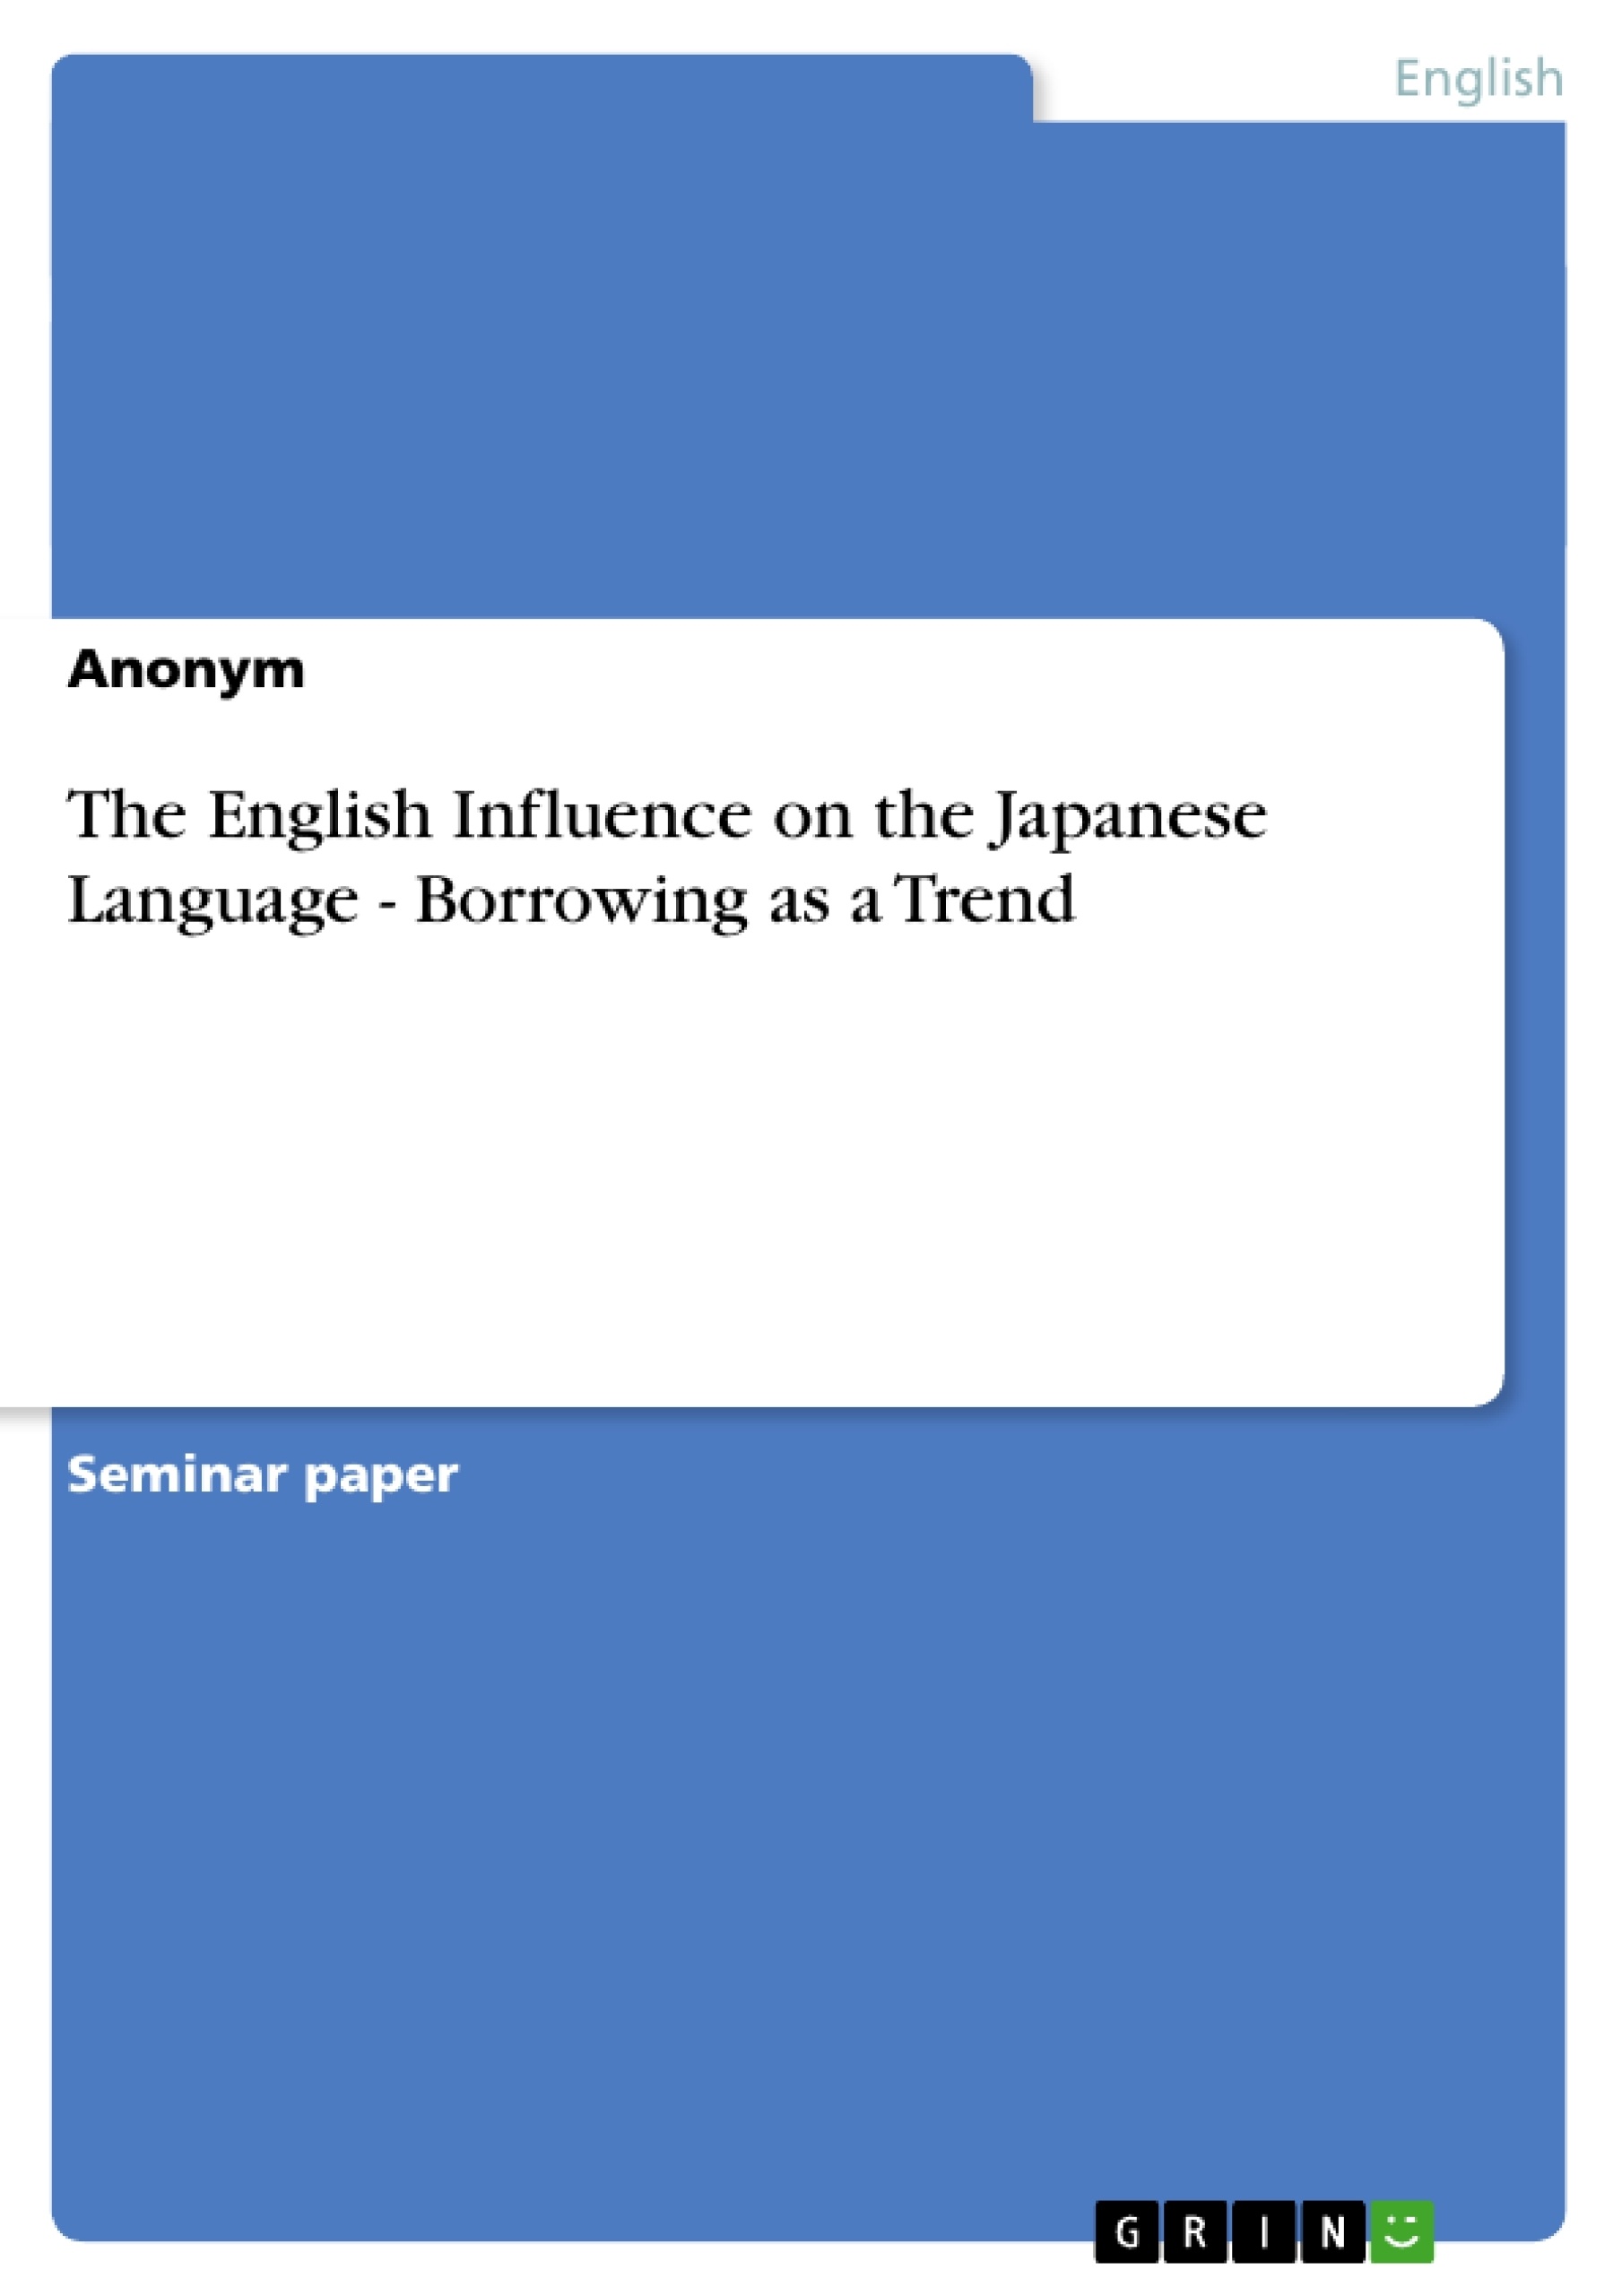 Title: The English Influence on the Japanese Language - Borrowing as a Trend